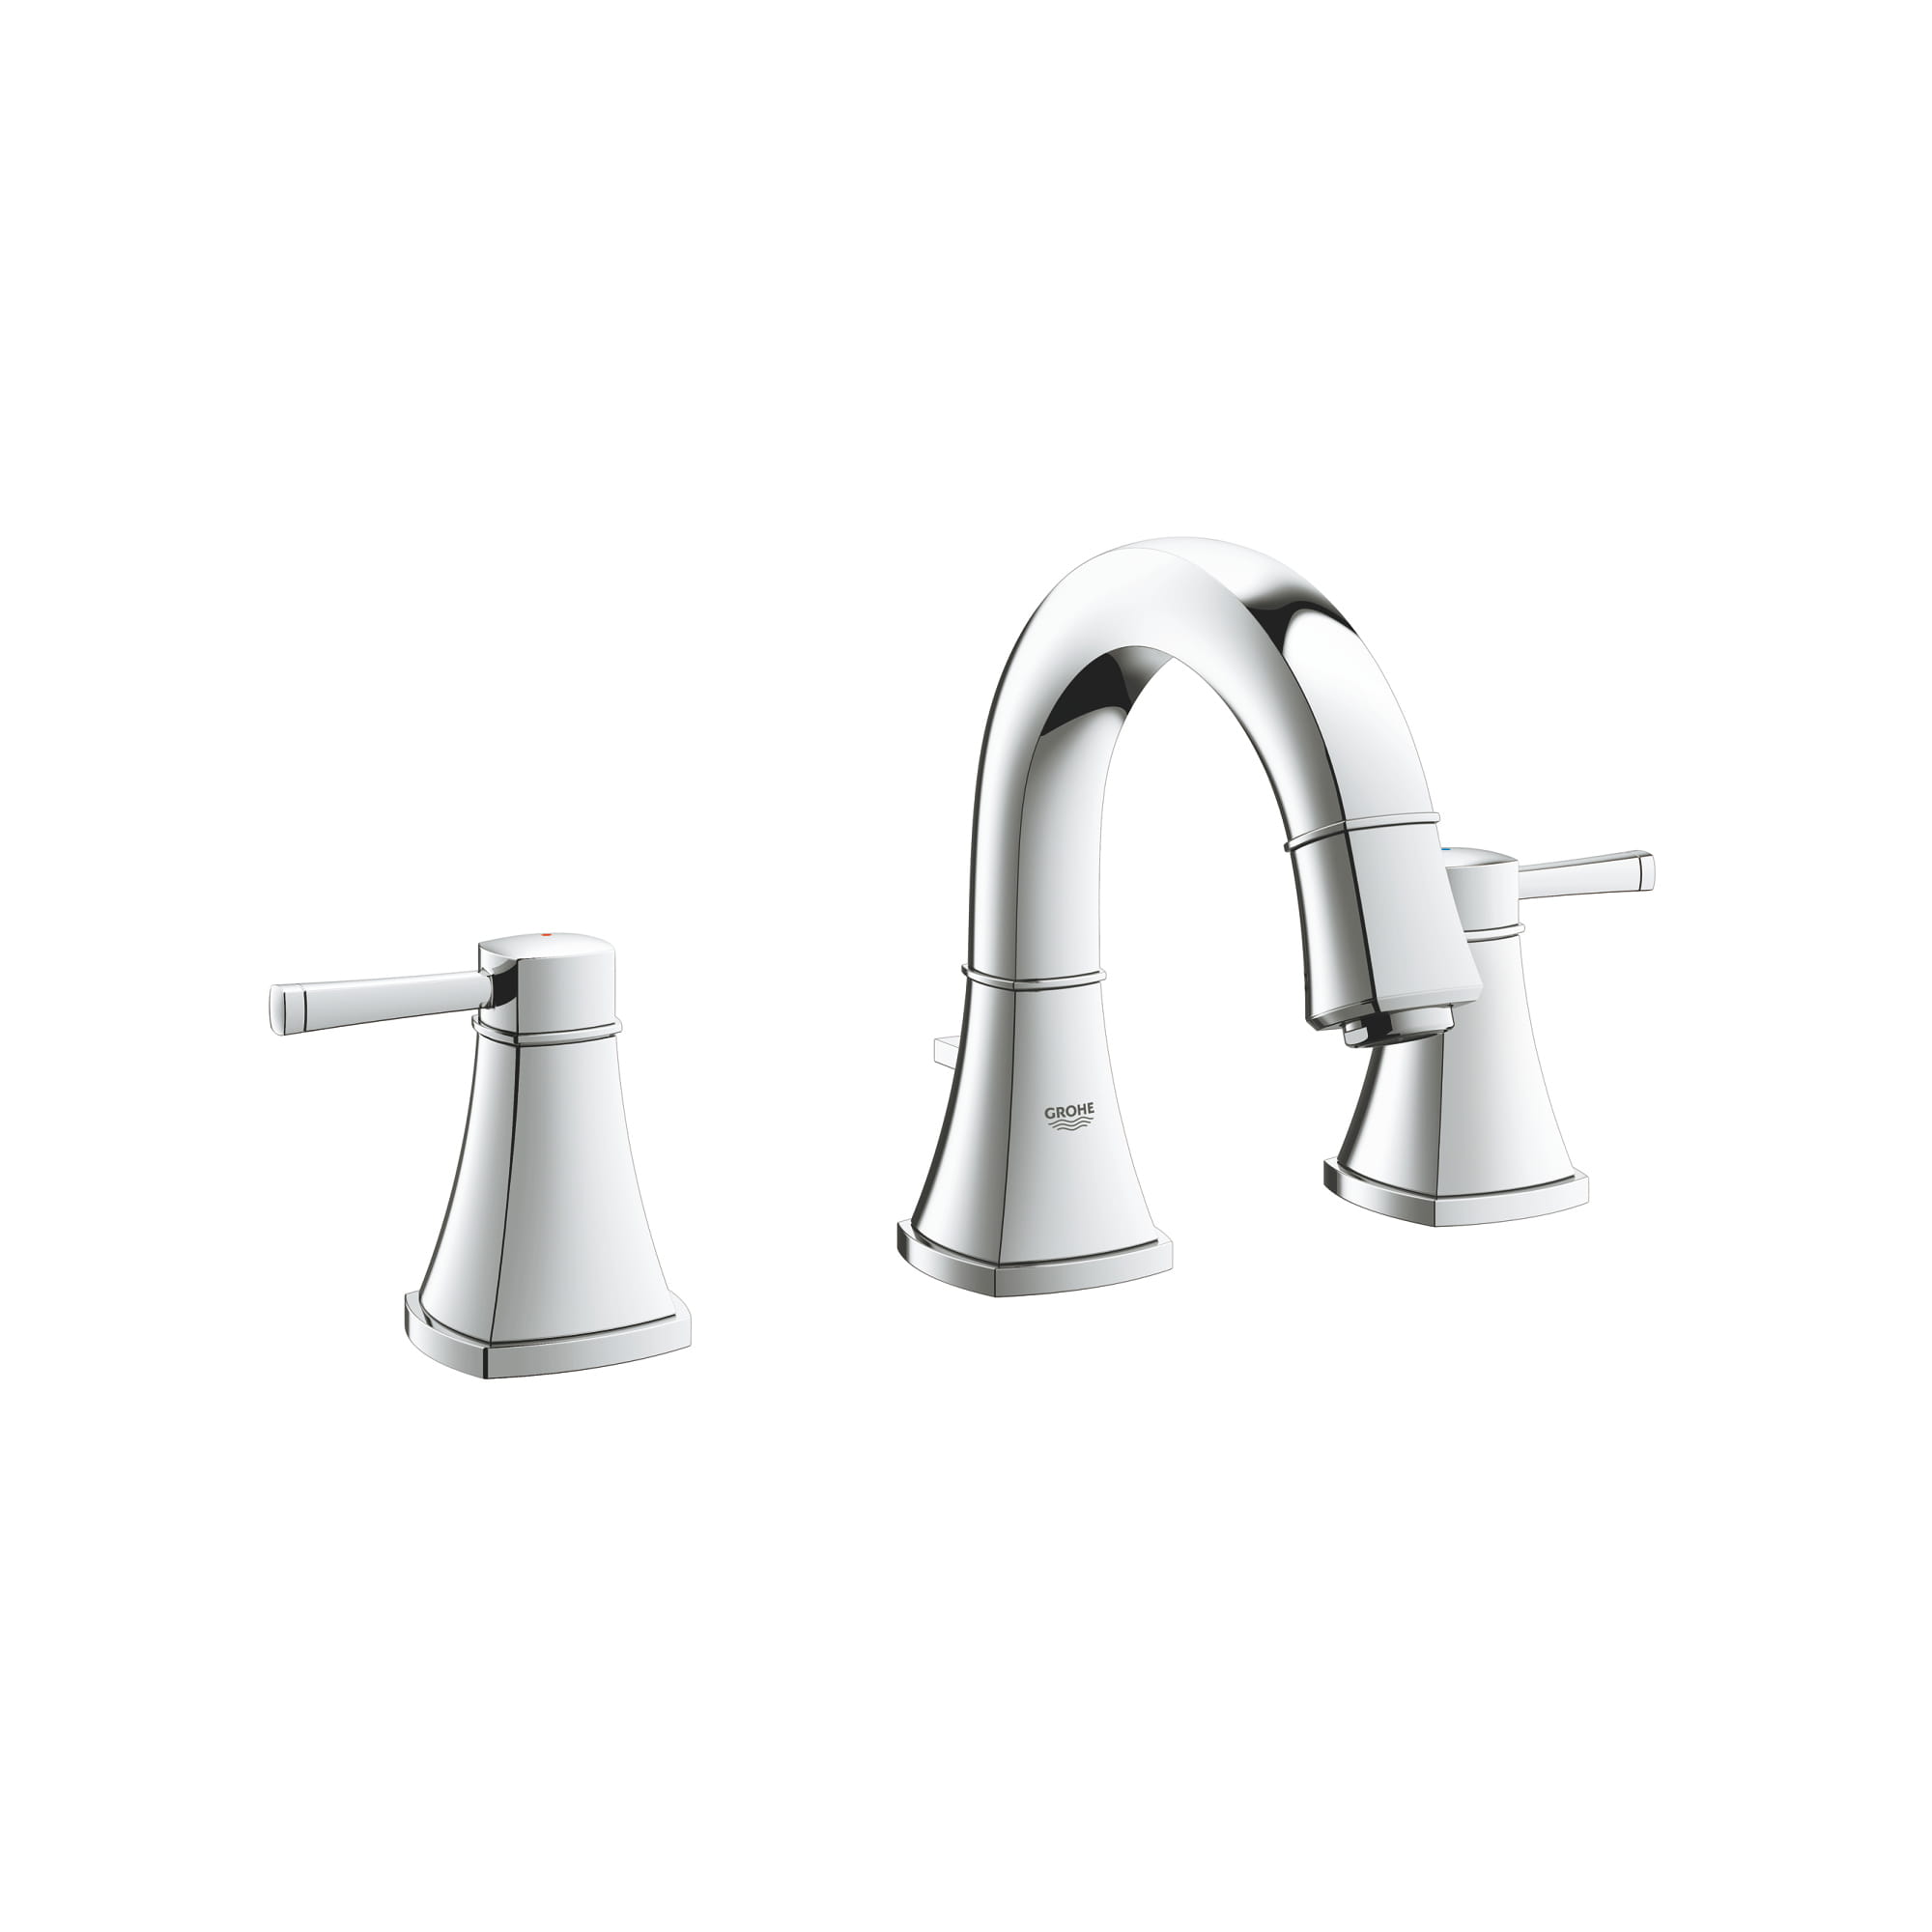 8-INCH WIDESPREAD 2-HANDLE S-SIZE BATHROOM FAUCET 1.2 GPM-related